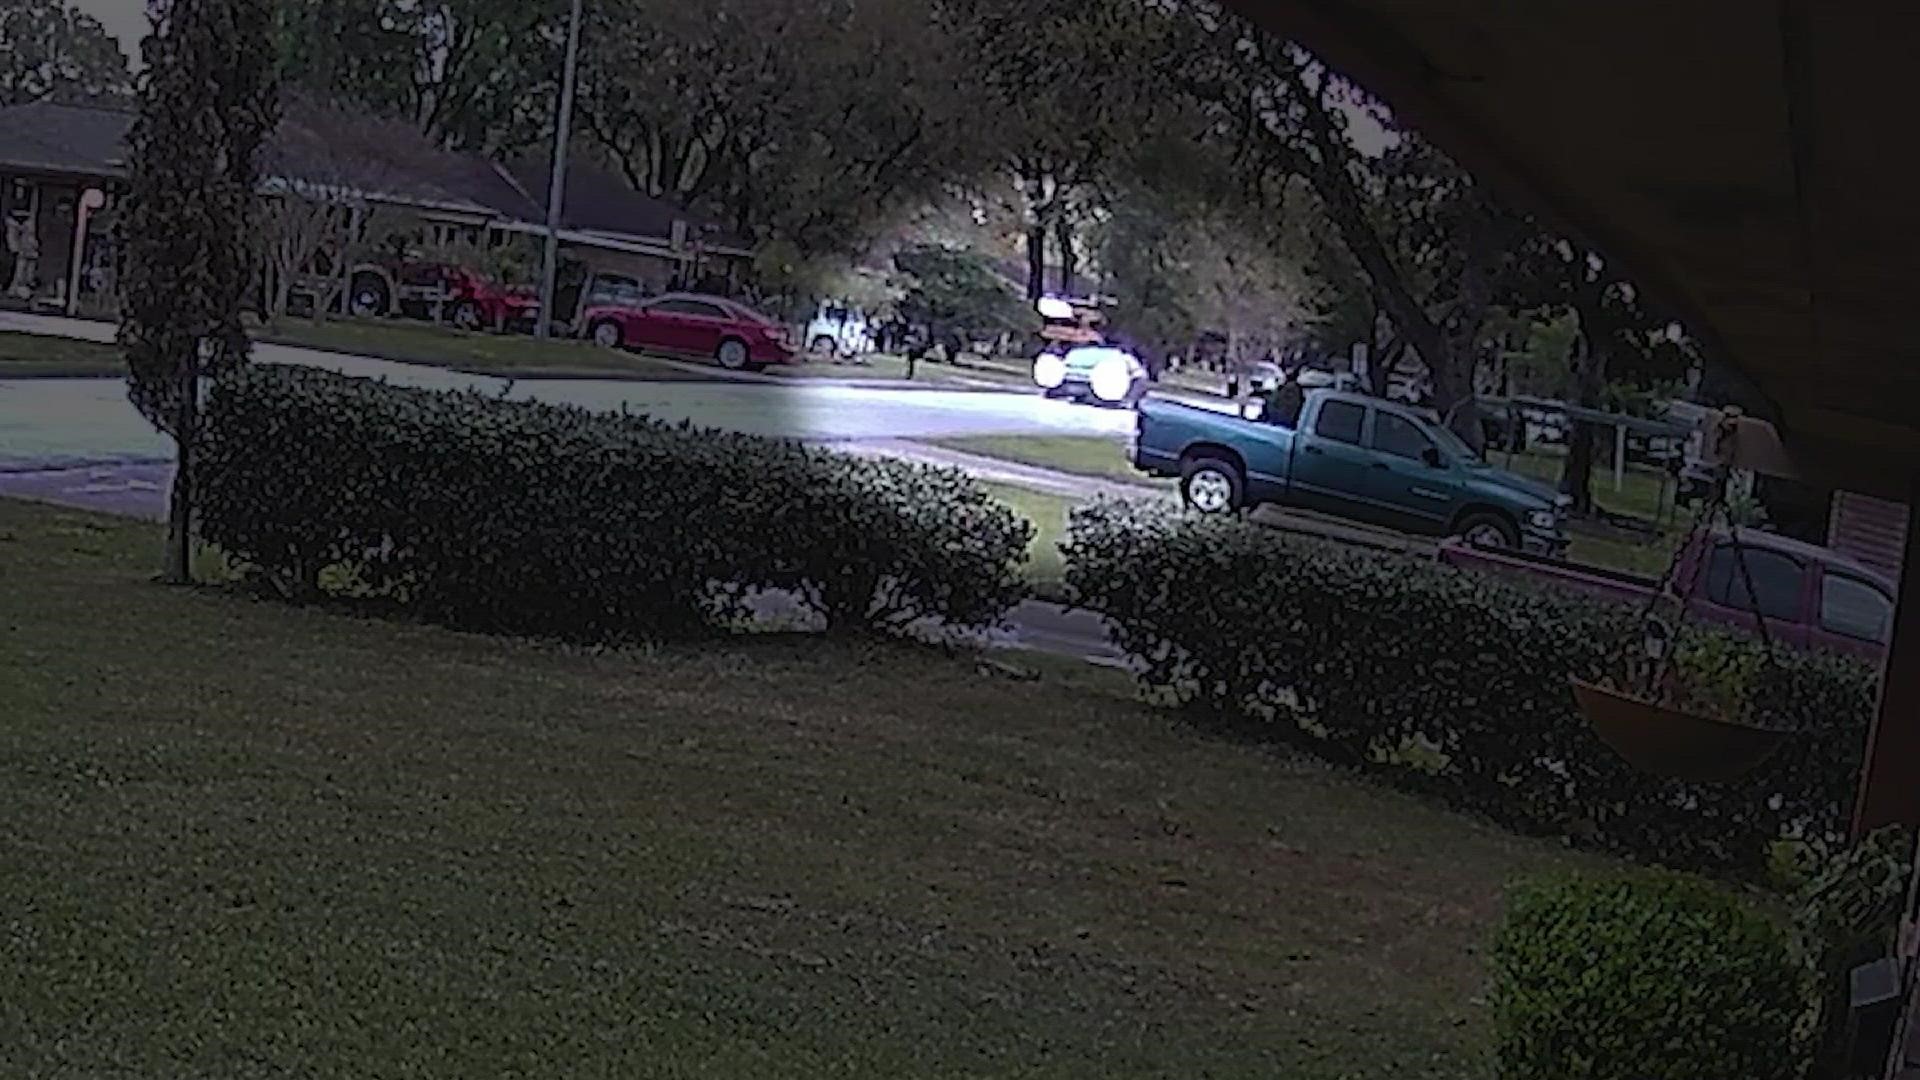 Video Man Seen Attempting To Lure Girl Into His Vehicle In Deer Park